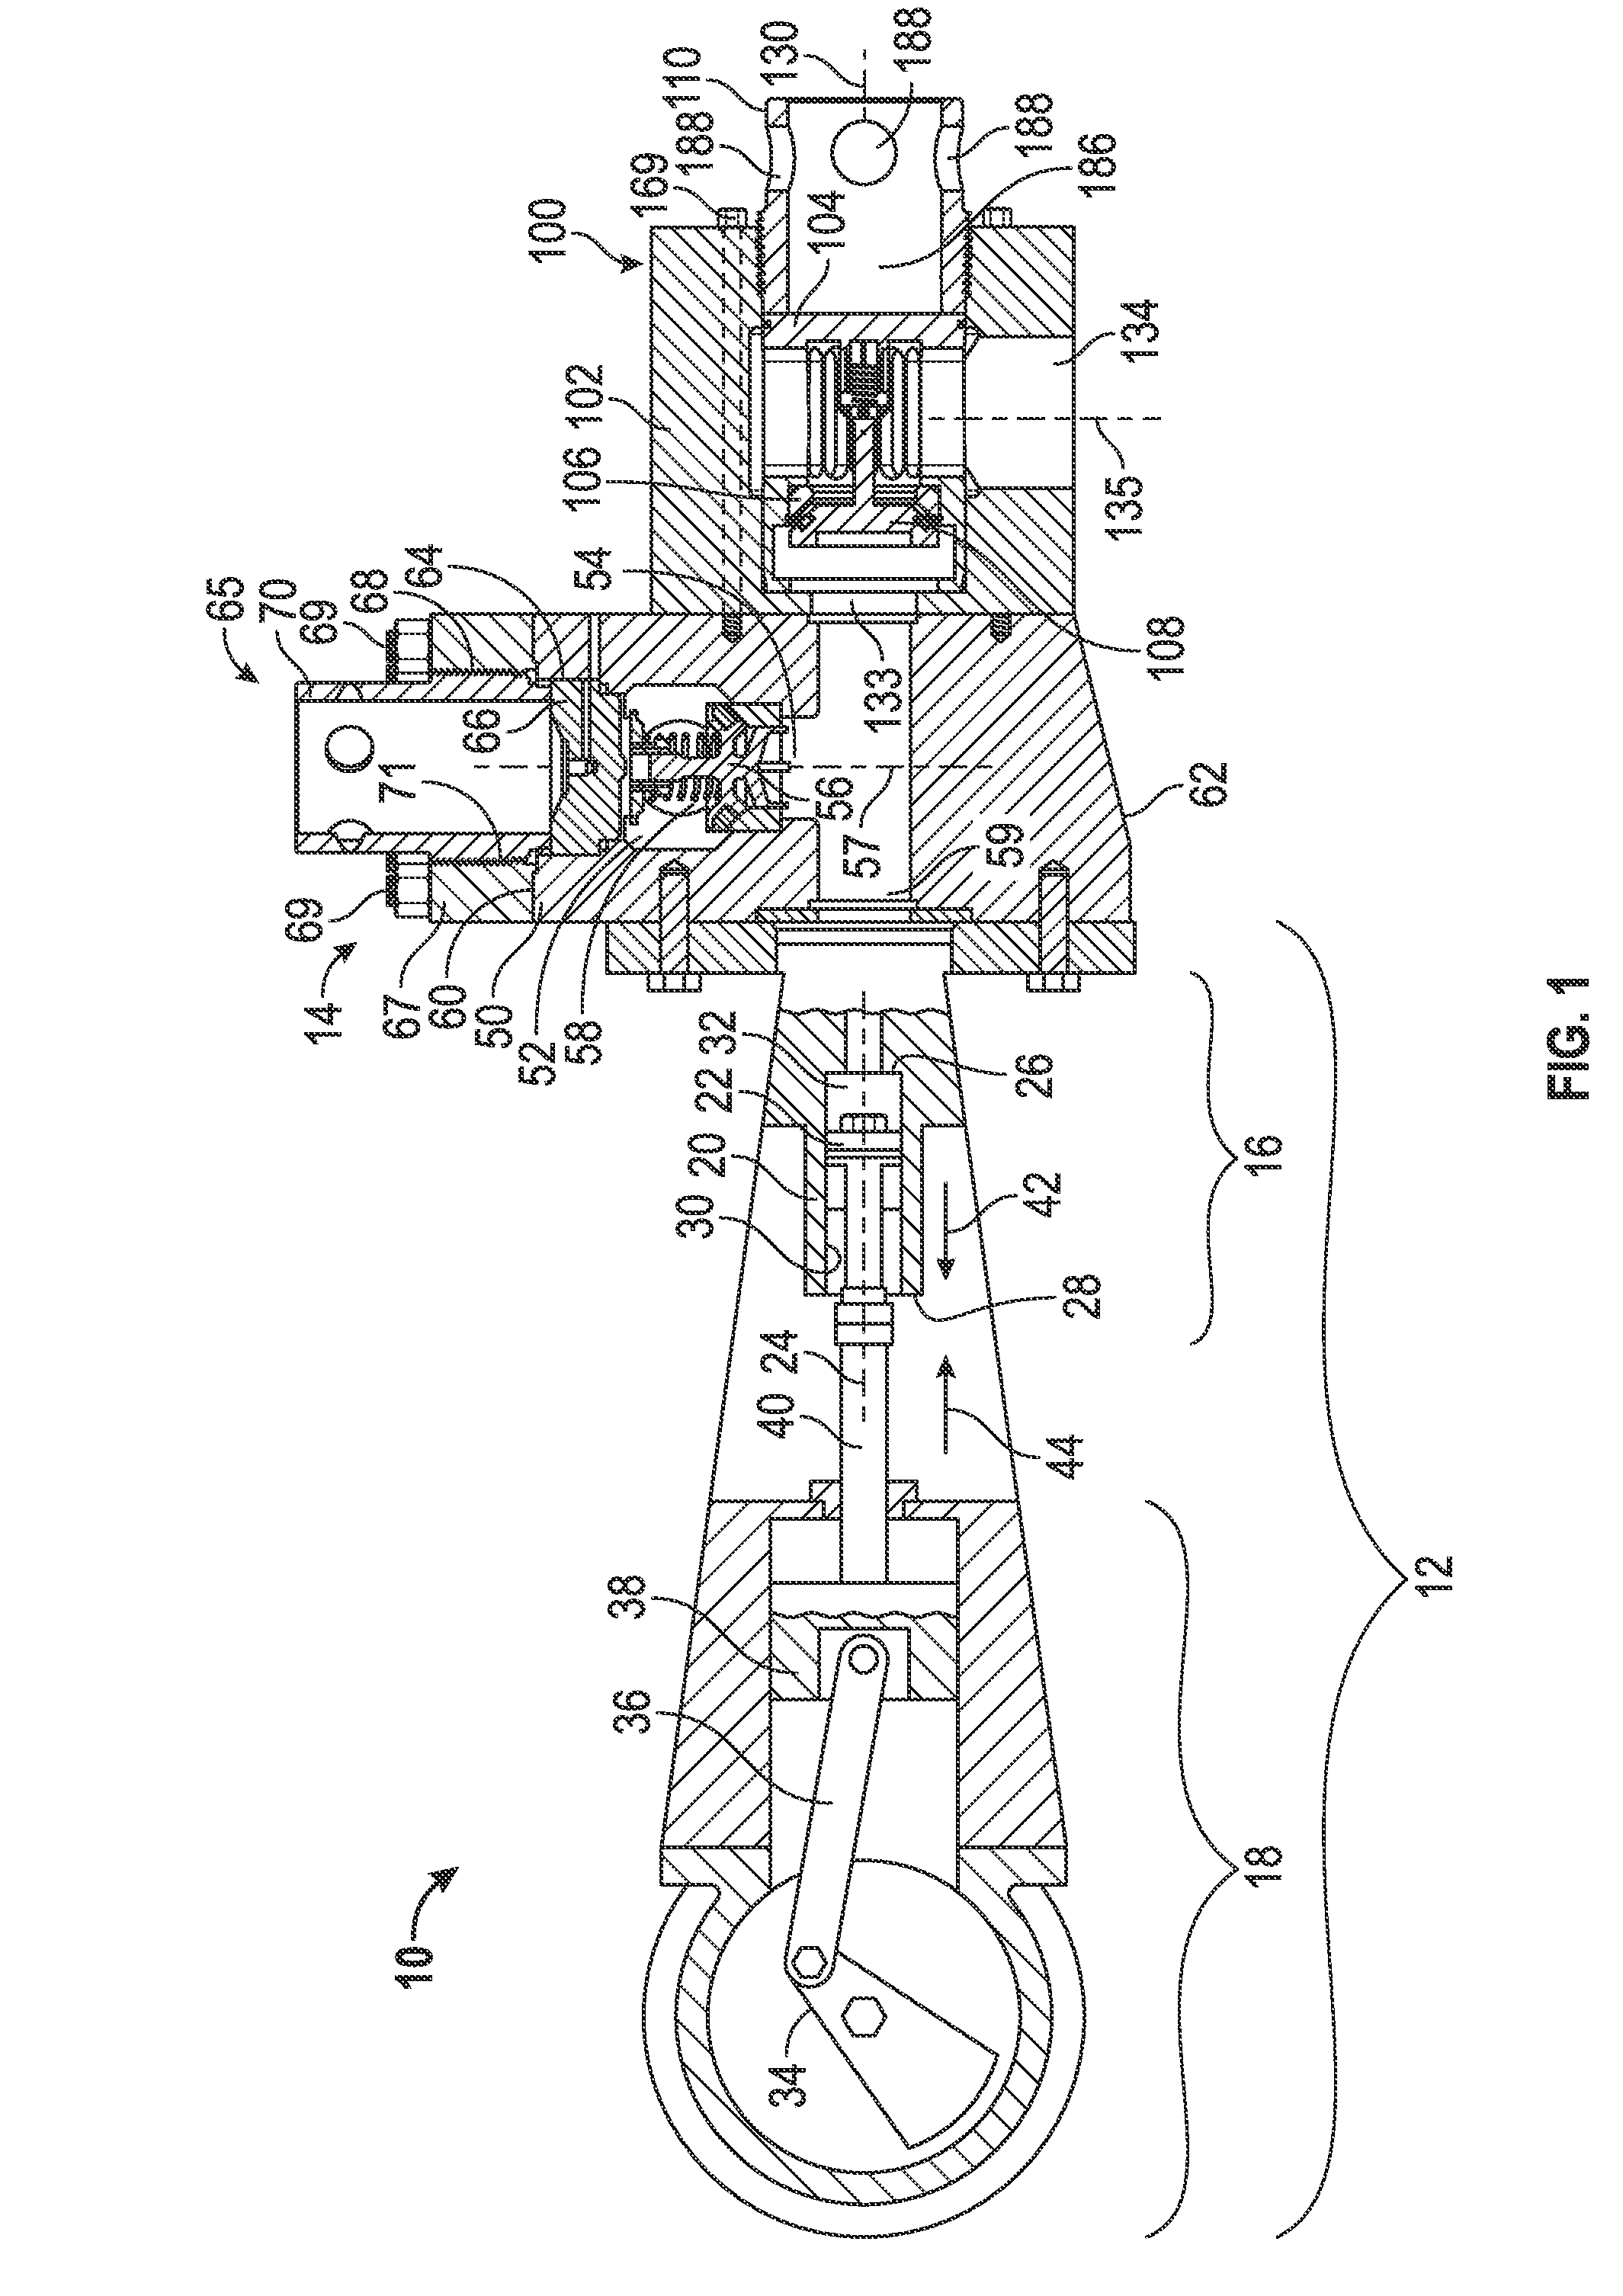 Positive Displacement Pump and Suction Valve Module Therefor